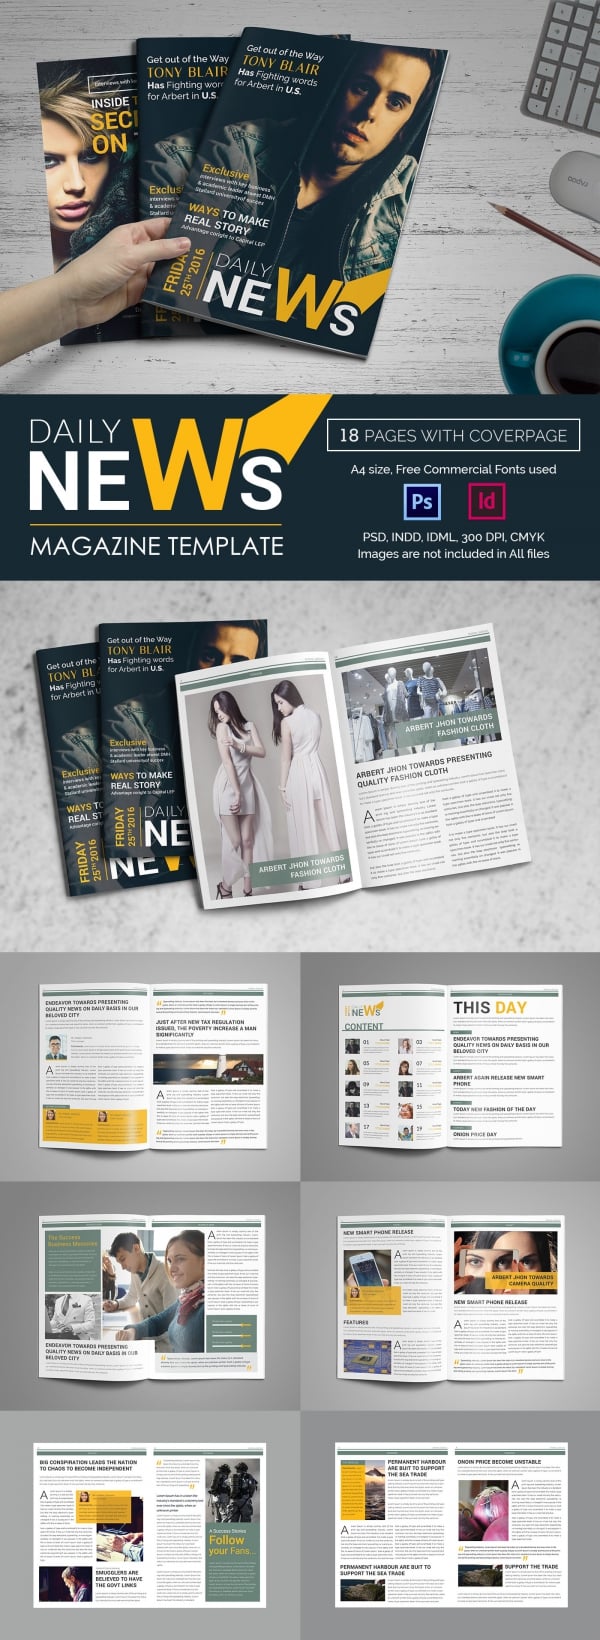 55+ Brand New Magazine Templates Free Word, PSD, EPS, AI, InDesign